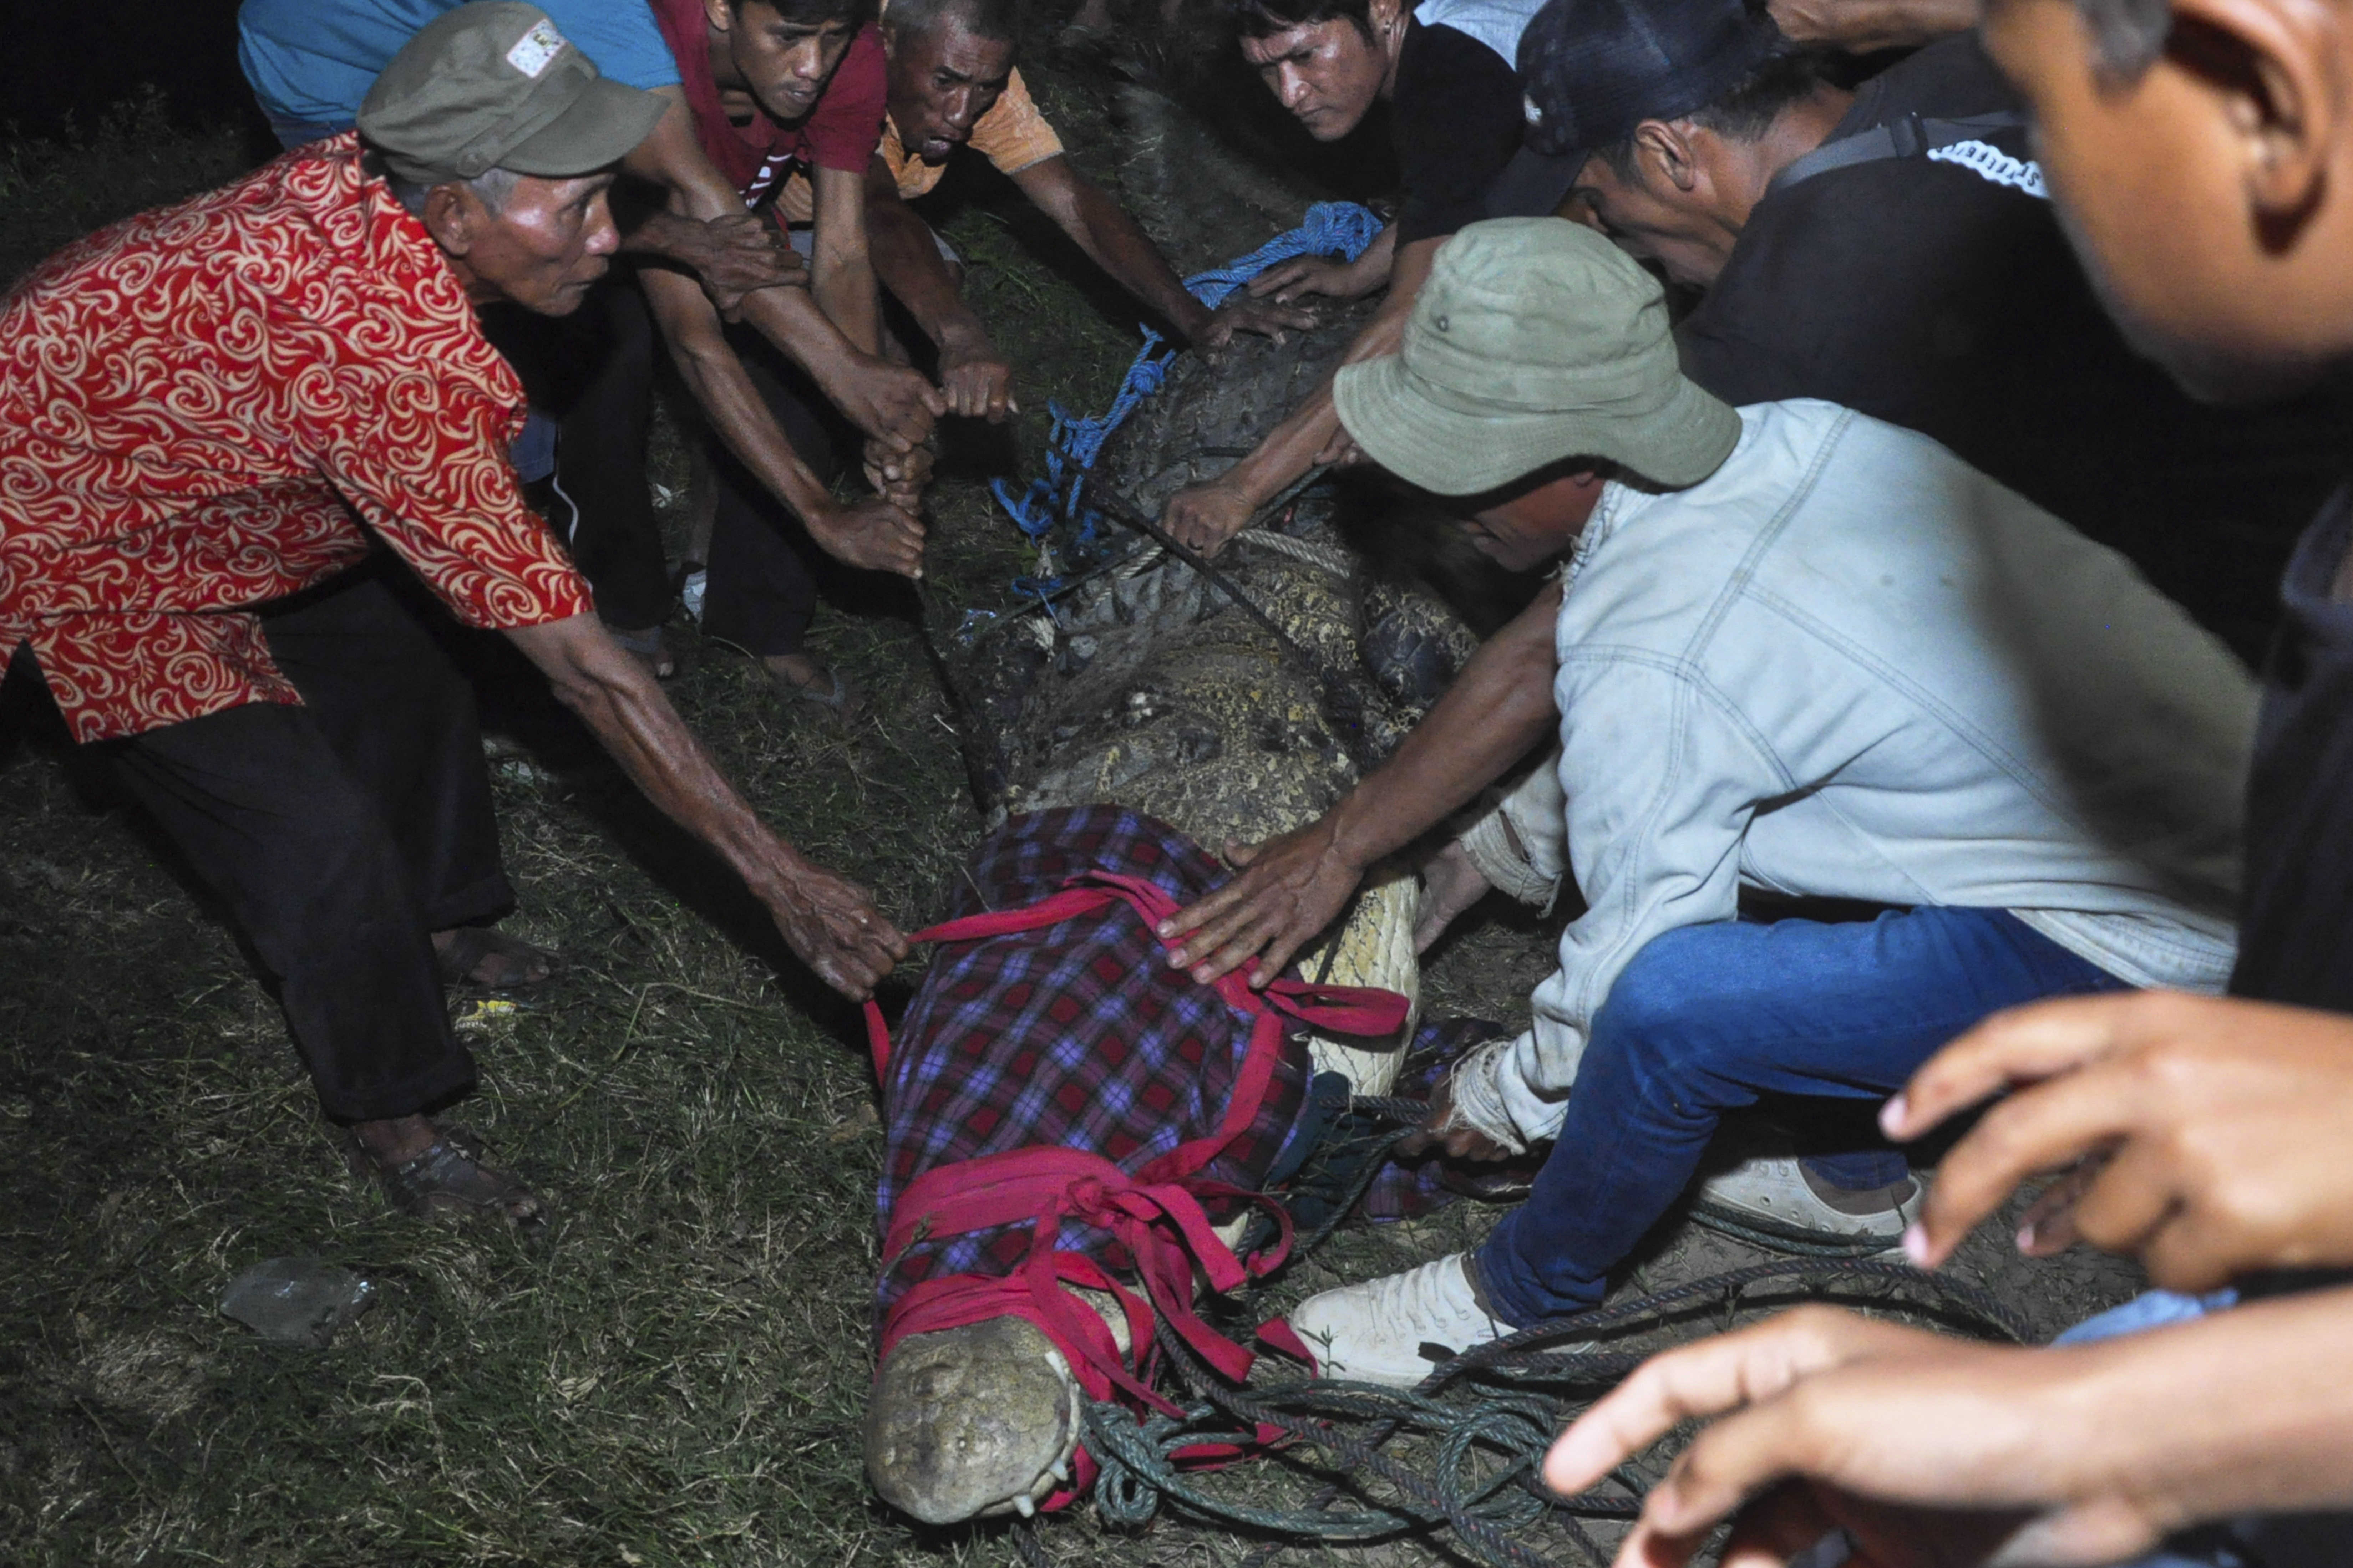 Residents surround the captured crocodile during the late night rescue op. Photo: MUHAMMAD RIFKI / AFP